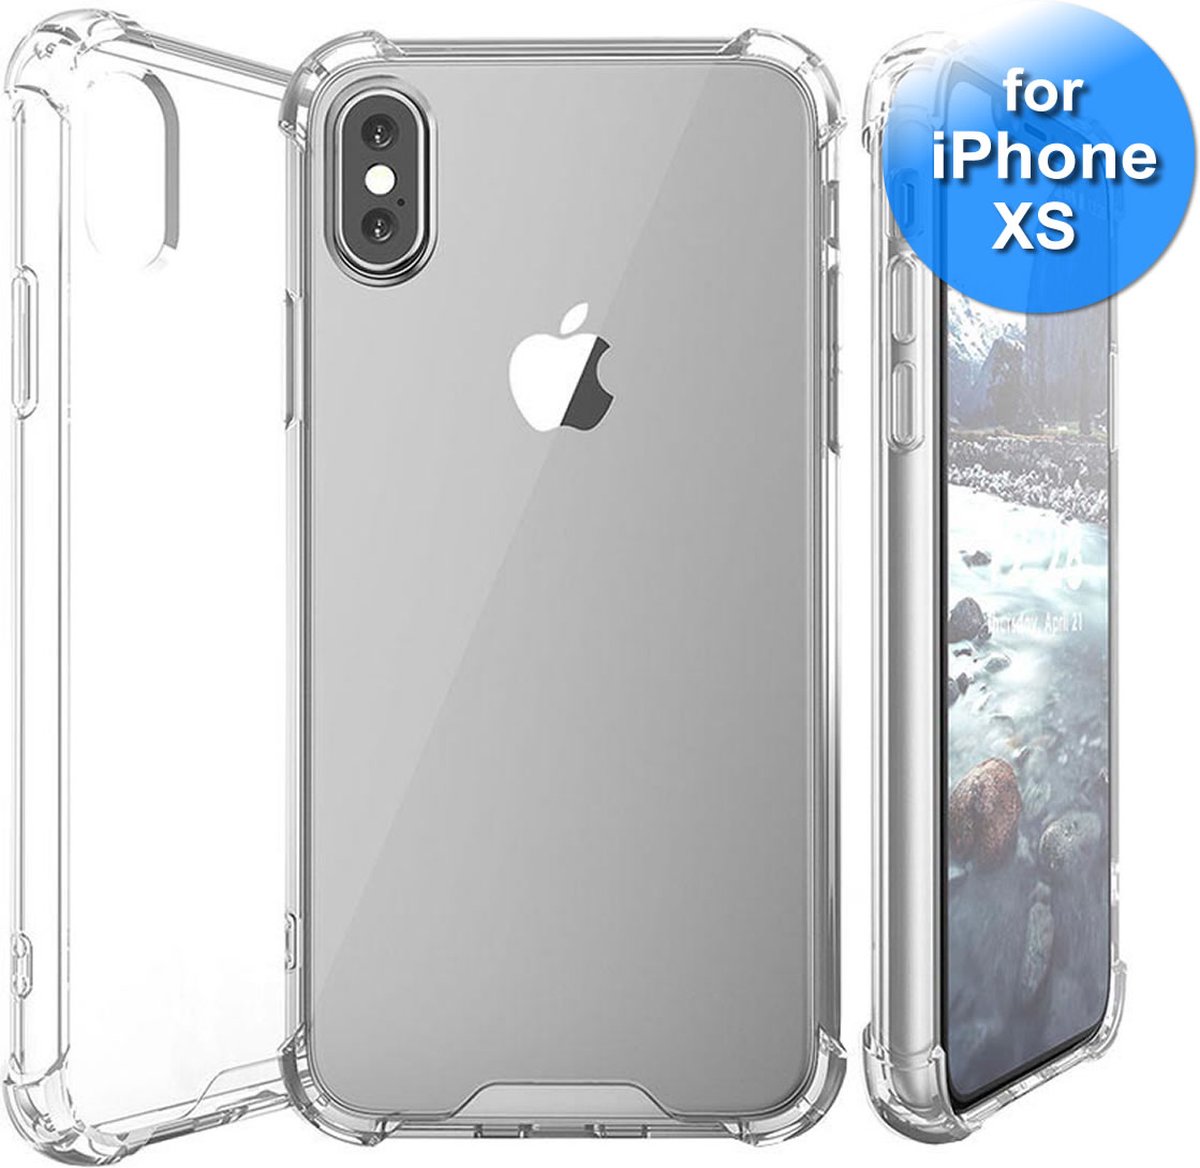 Hoesje geschikt voor iPhone Xs - Anti Shock Cover - Hard Back Cover - Transparant